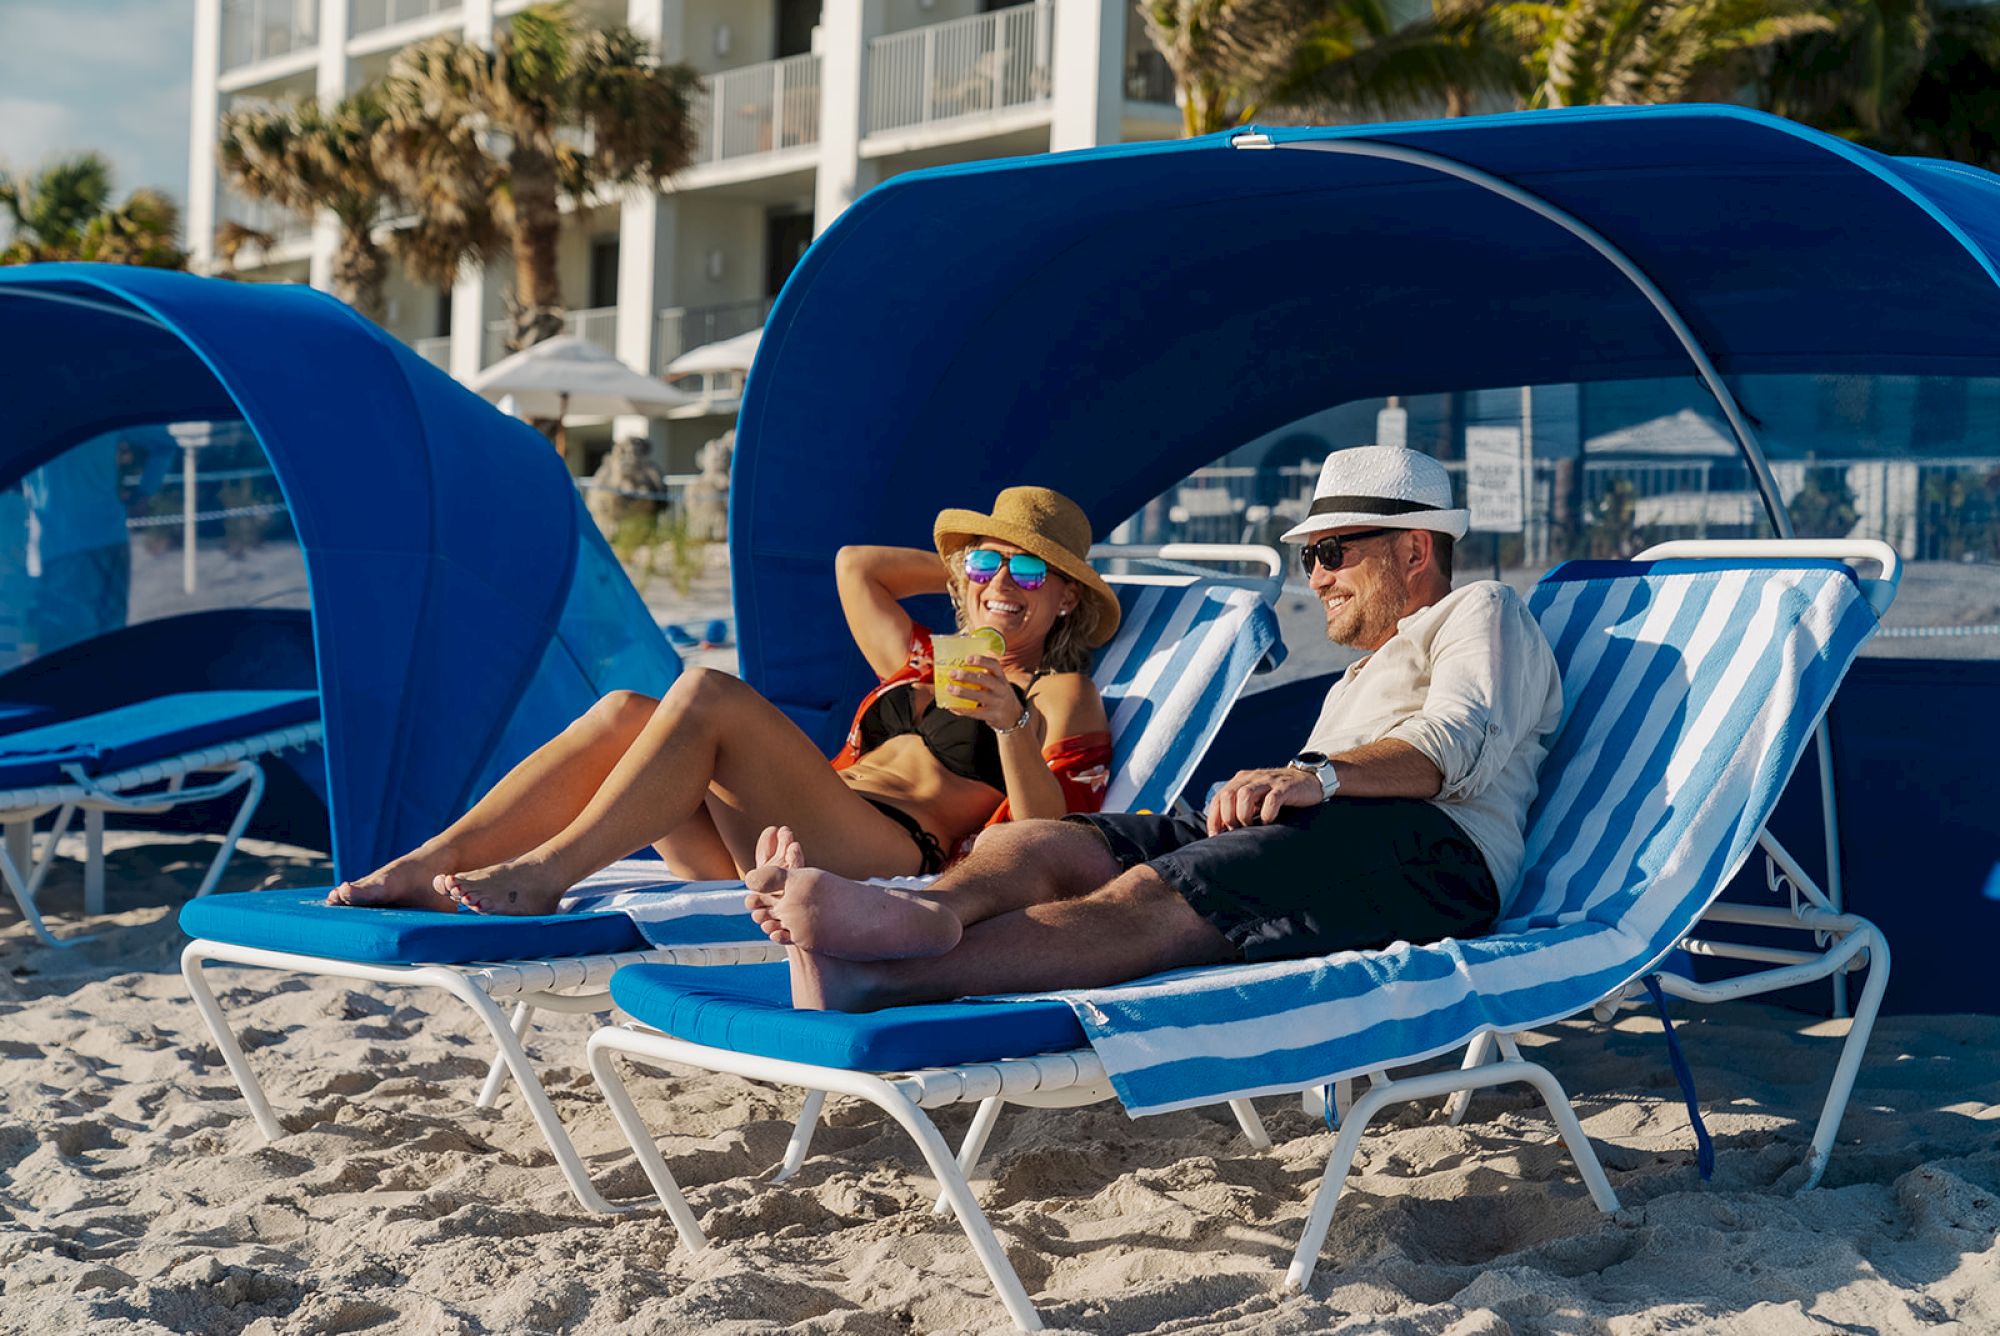 A man and woman relax on beach lounge chairs under blue canopies, enjoying the sun and a drink, with a hotel and palm trees in the background.